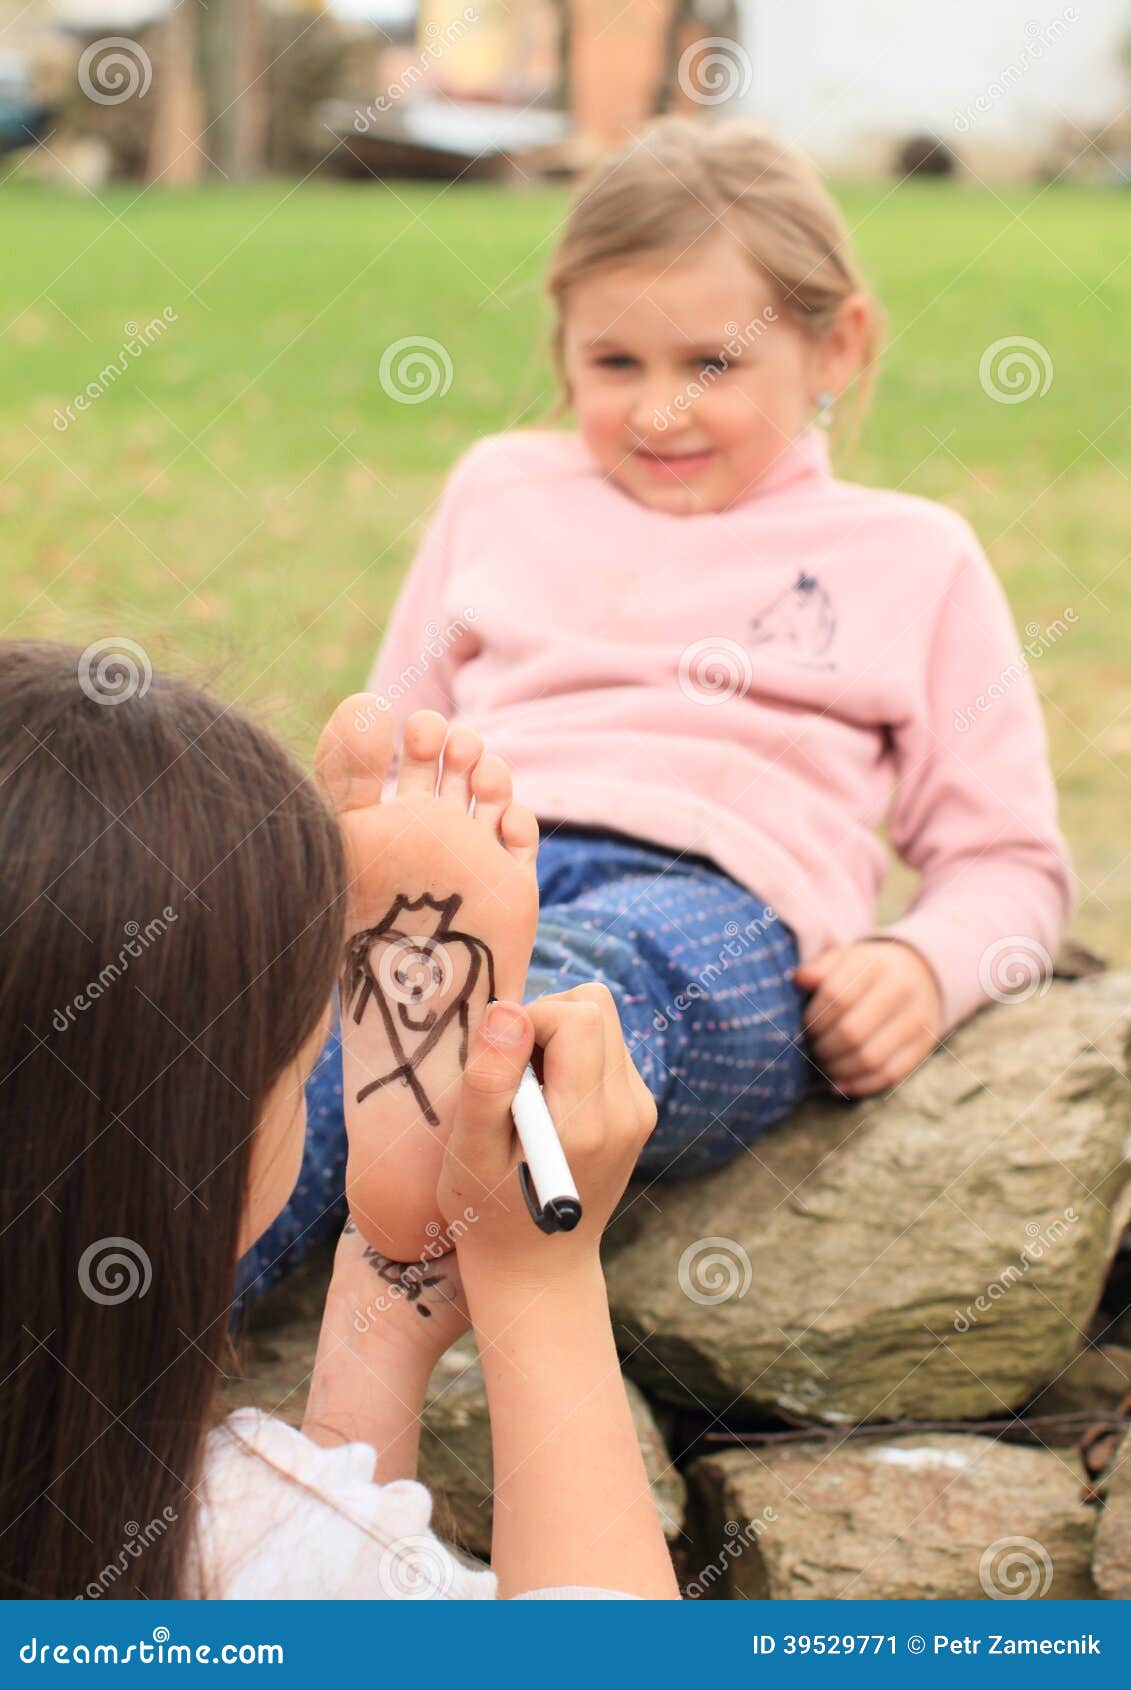 girl drawing hearts on sole